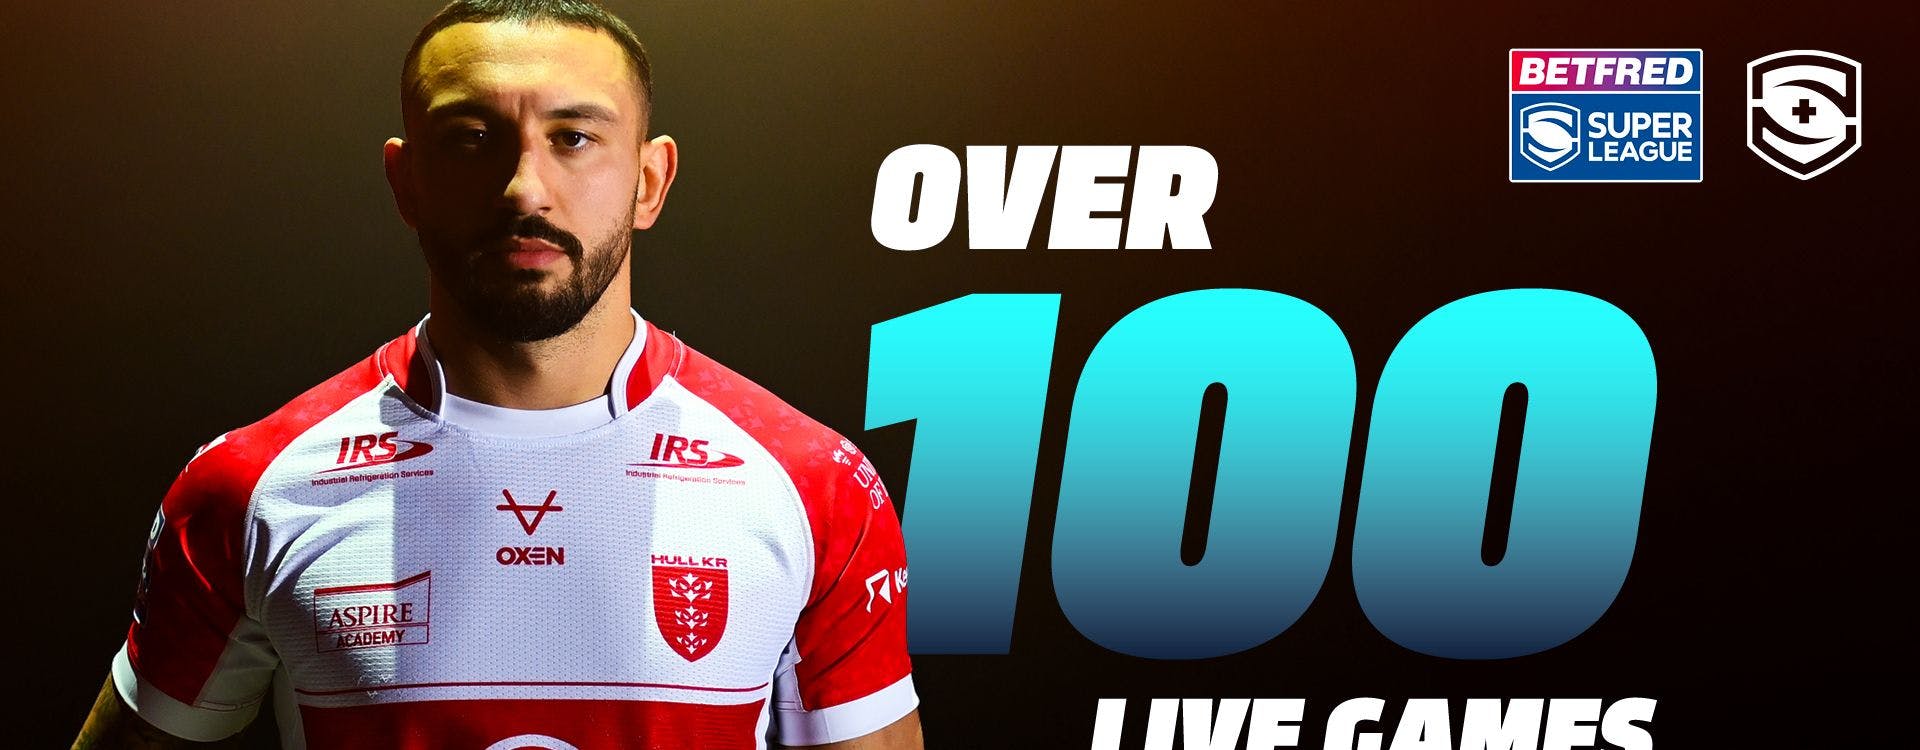 Rugby League Commercial, IMG & Endeavor Streaming launch SuperLeague+